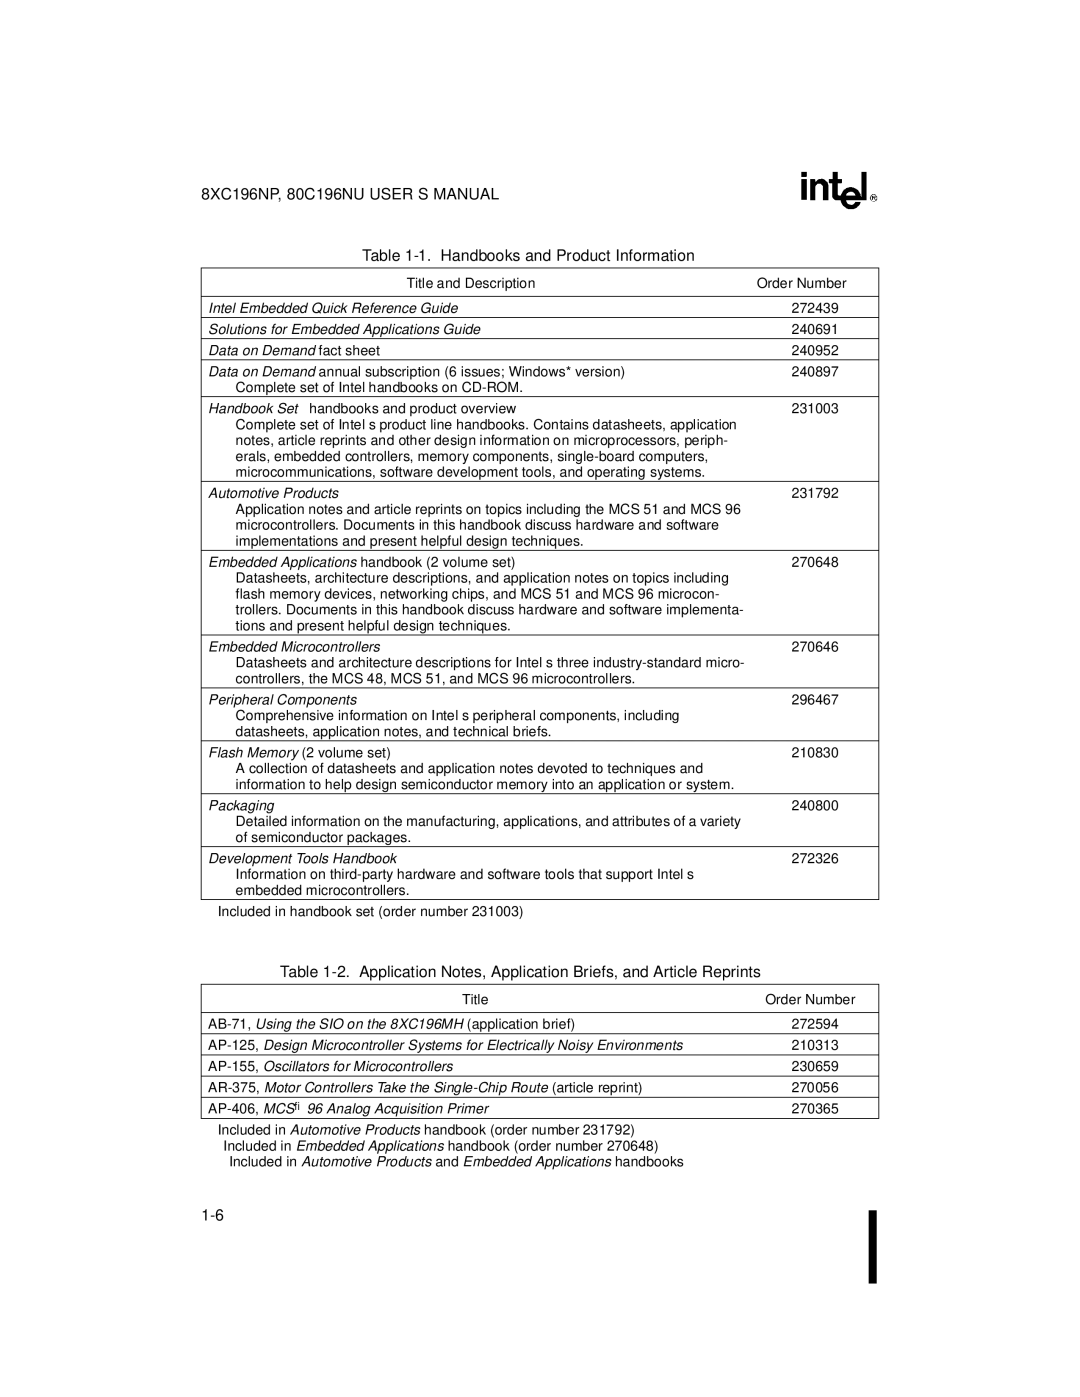 Intel 8XC196NP, 80C196NU Handbooks and Product Information, Application Notes, Application Briefs, and Article Reprints 